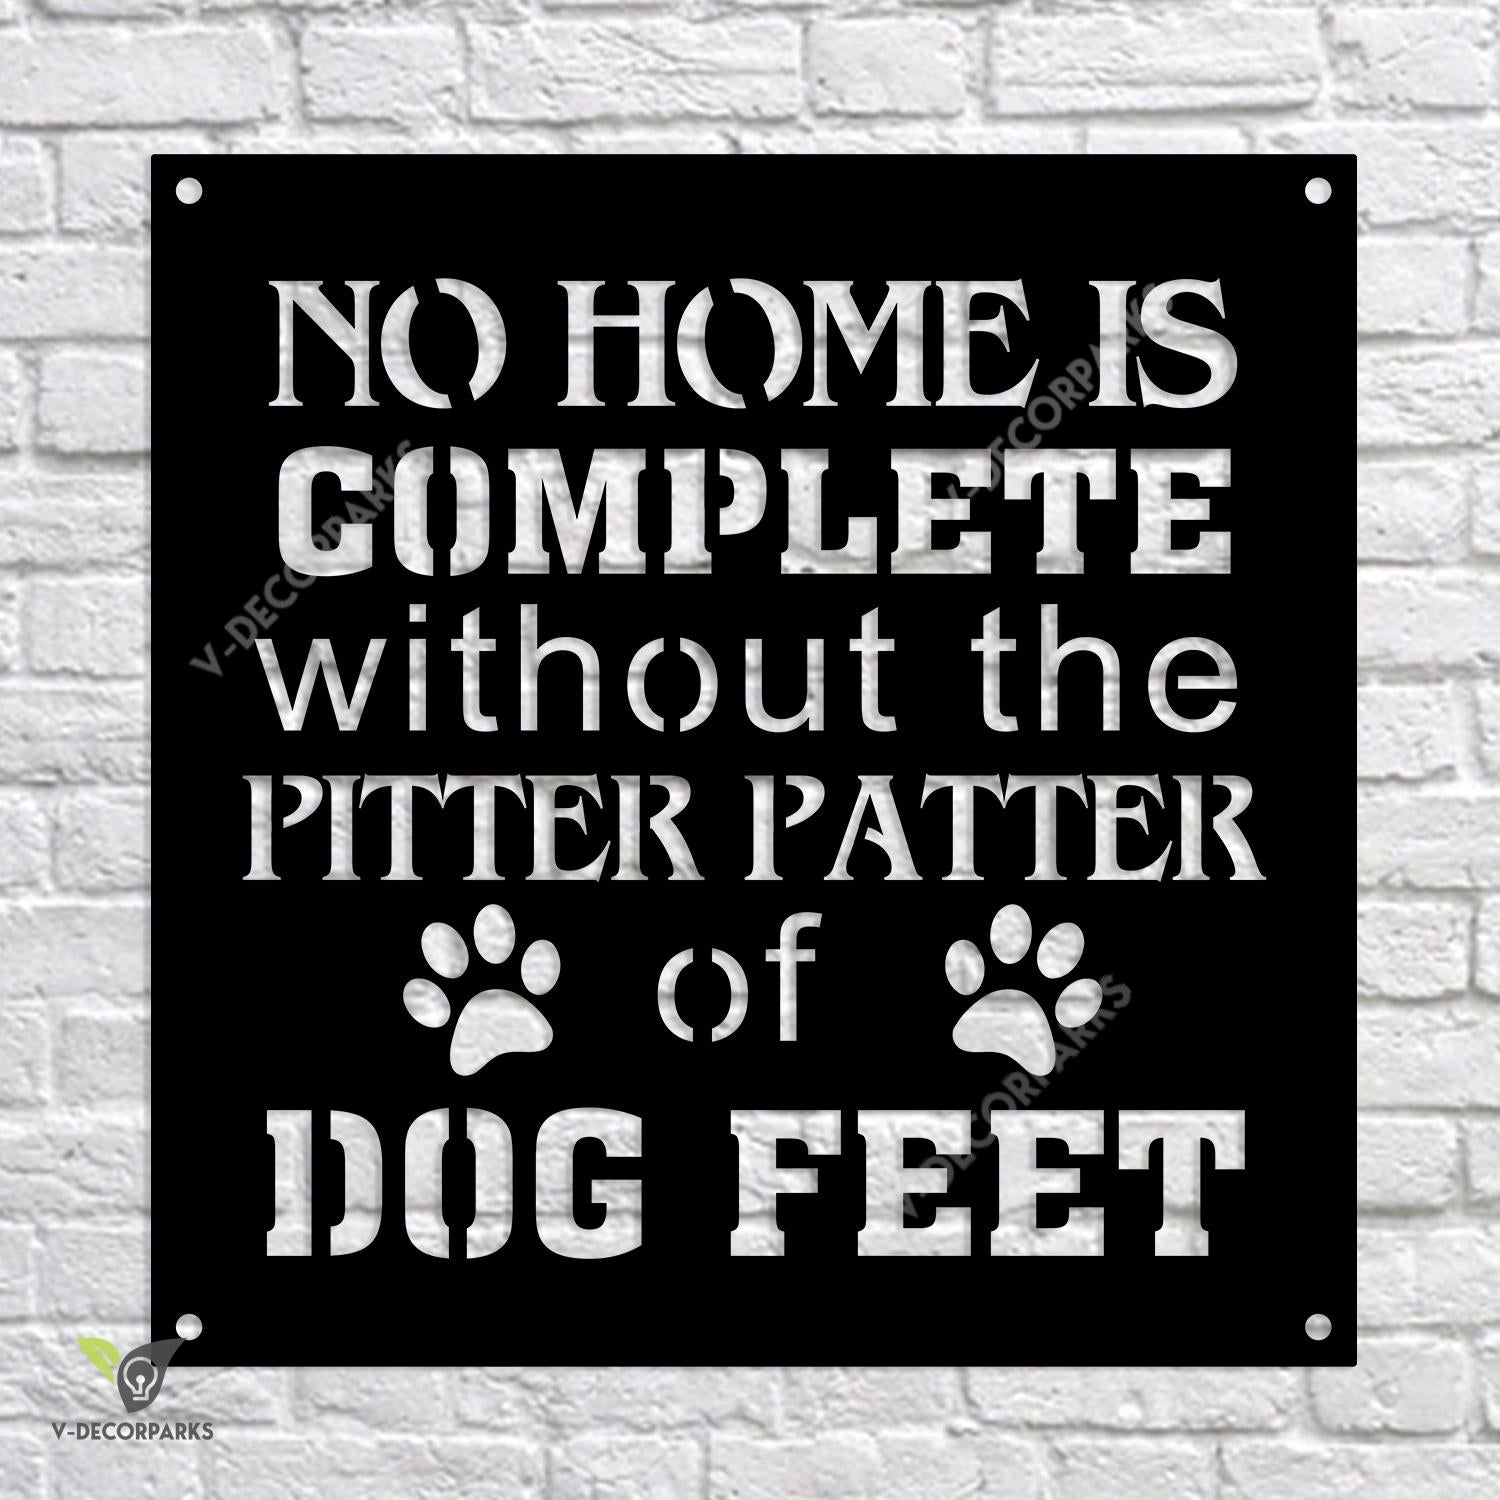 No Home Is Complete Without The Pitter Patter Of Dog Feet Funny Metal Sign, Pet Decorative Accent